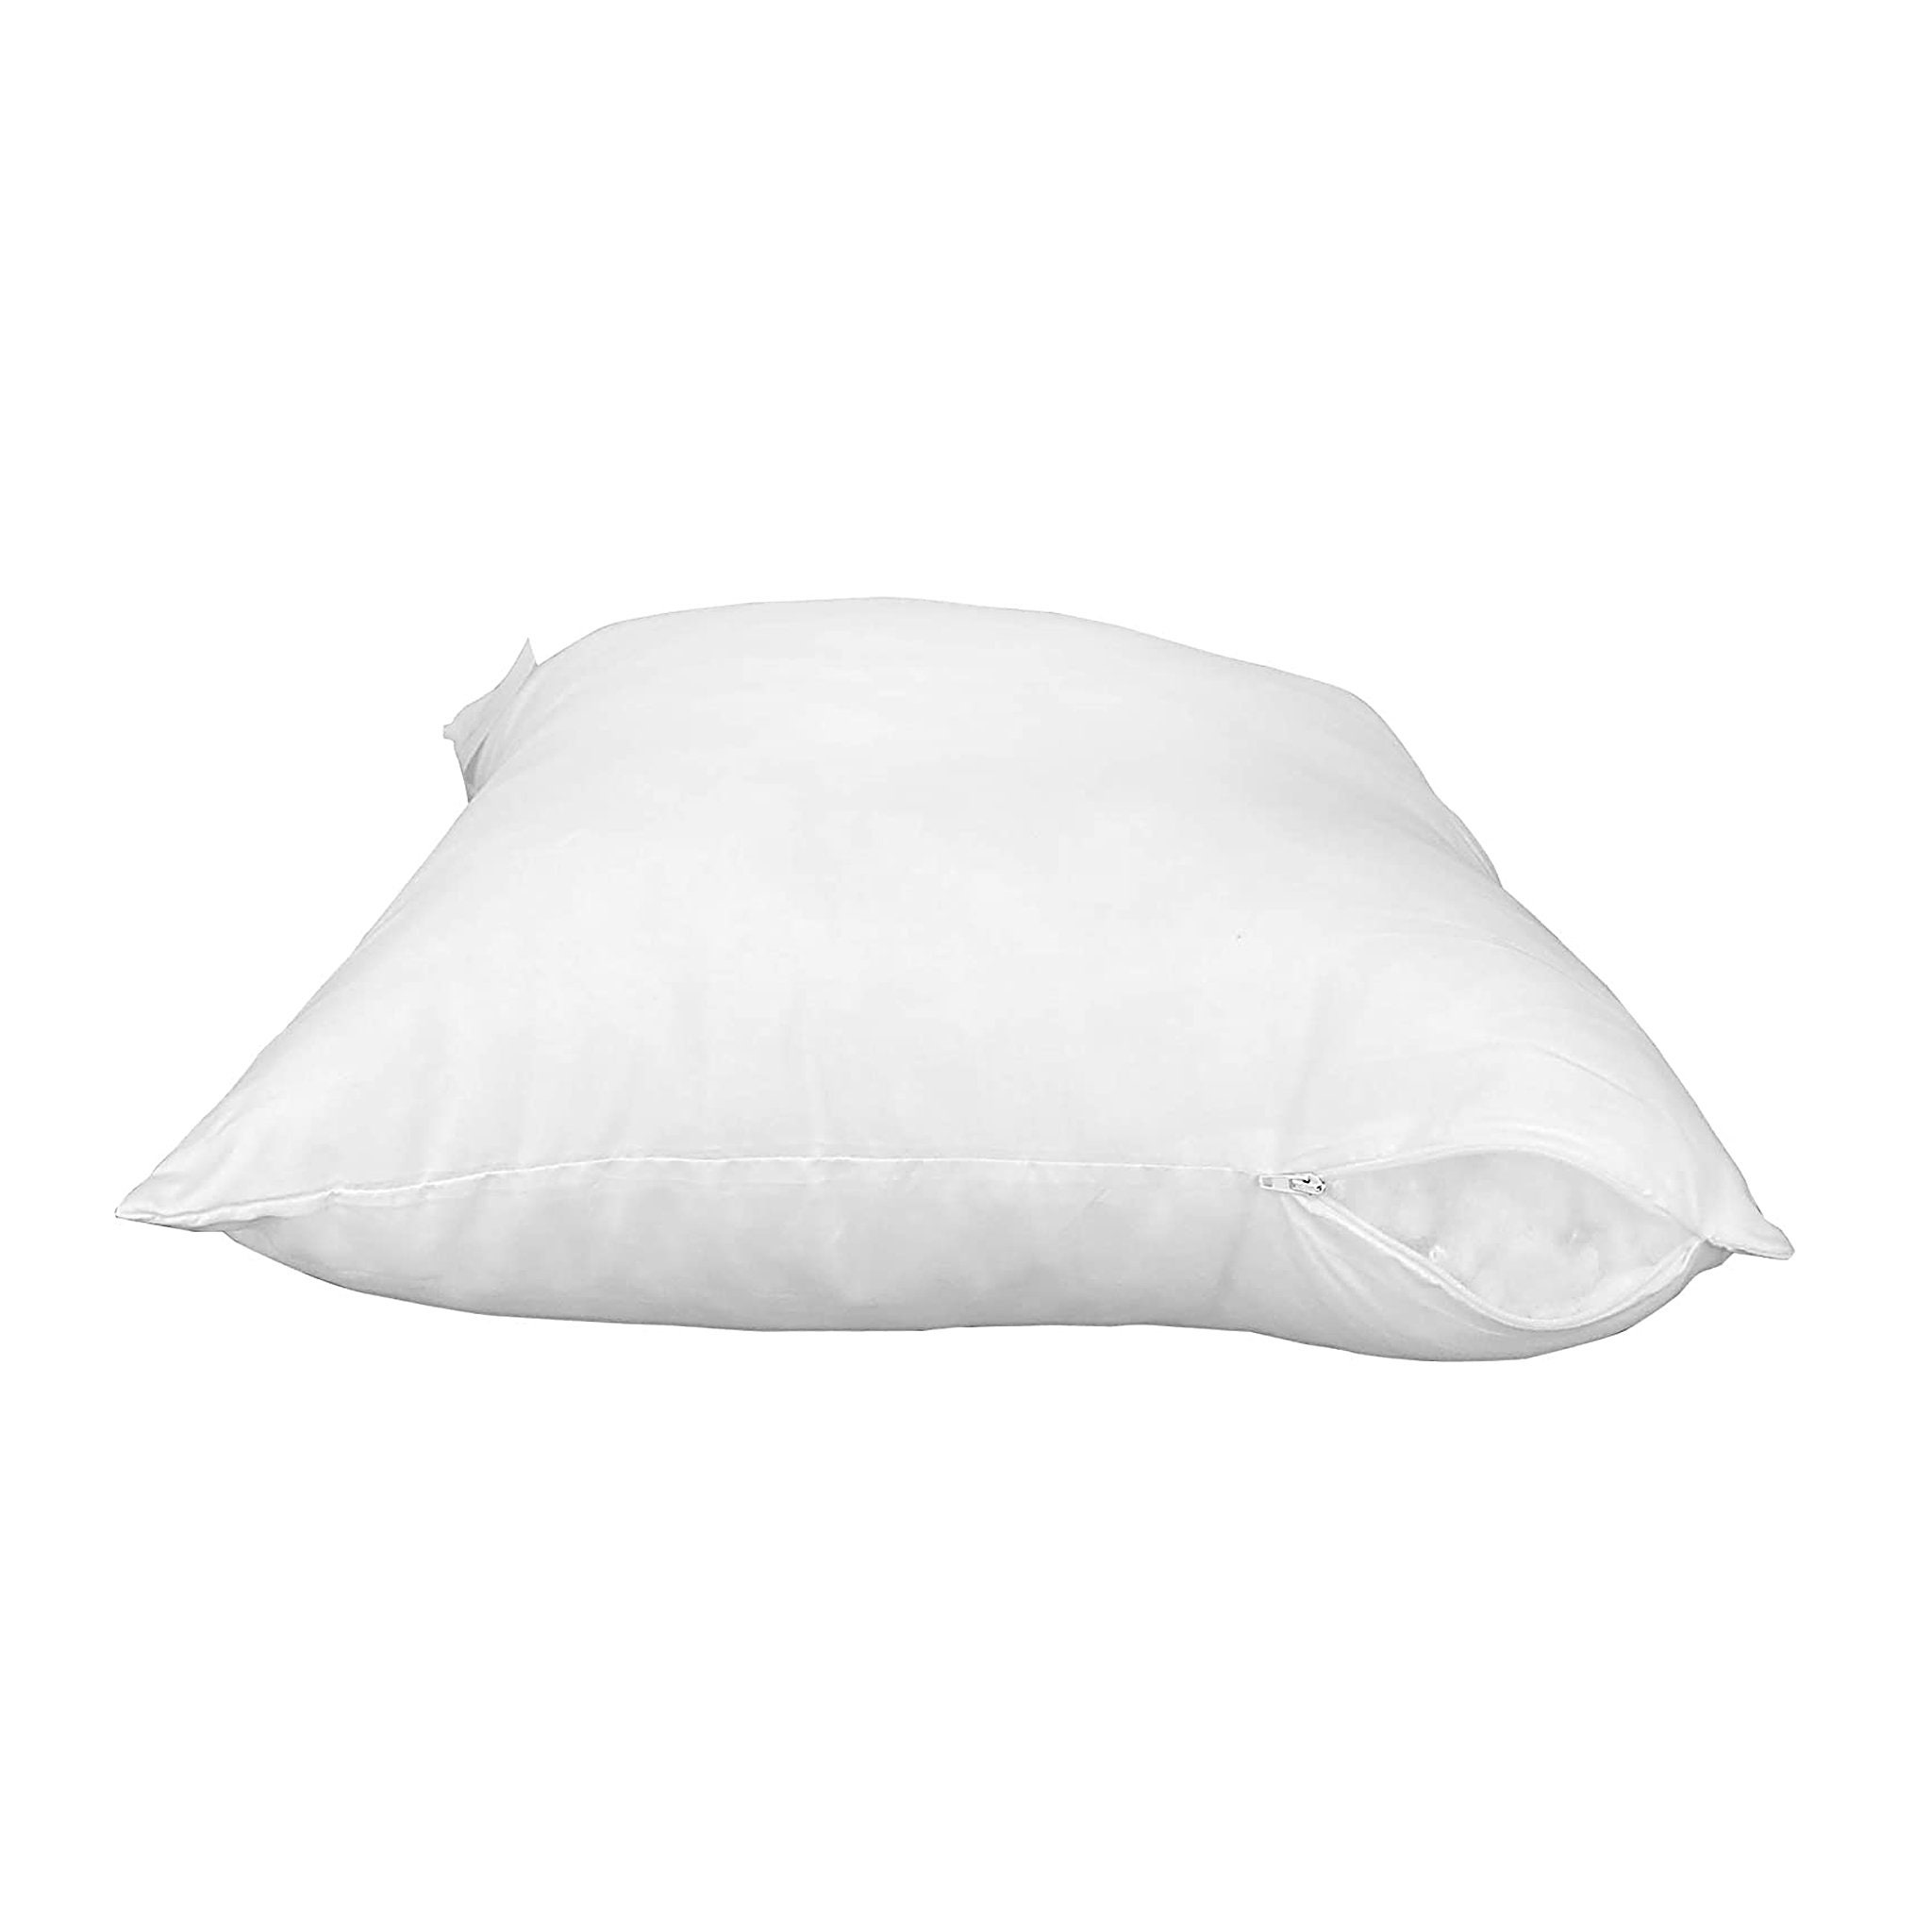 Hometex Canada - 4-Pack, 18x18 Pillow Insert, 100%, Hypoallergenic,  Durable & Premium Soft Polyester Filled Standard Cover, Used for Throw &  Square